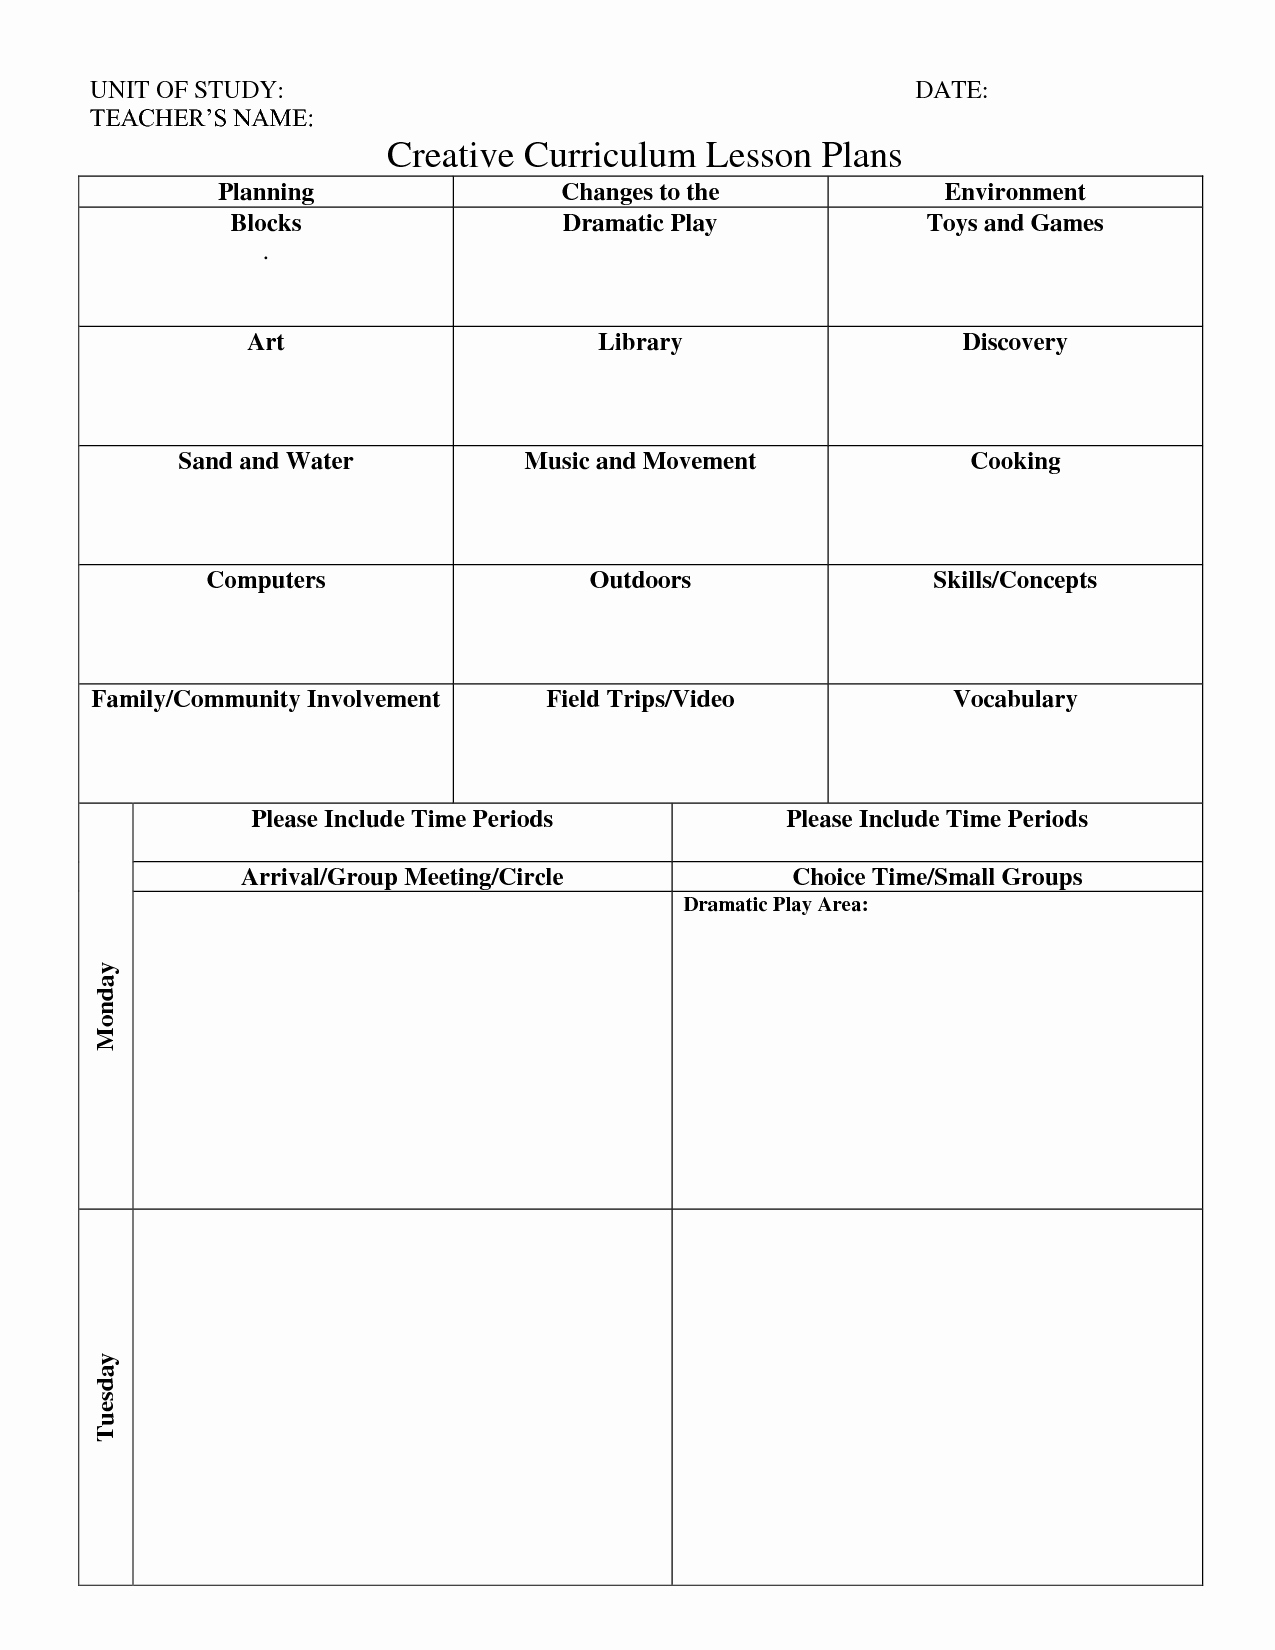 Lesson Plan Template for toddlers Unique Print Creative Curriculum Lesson Plan Bing